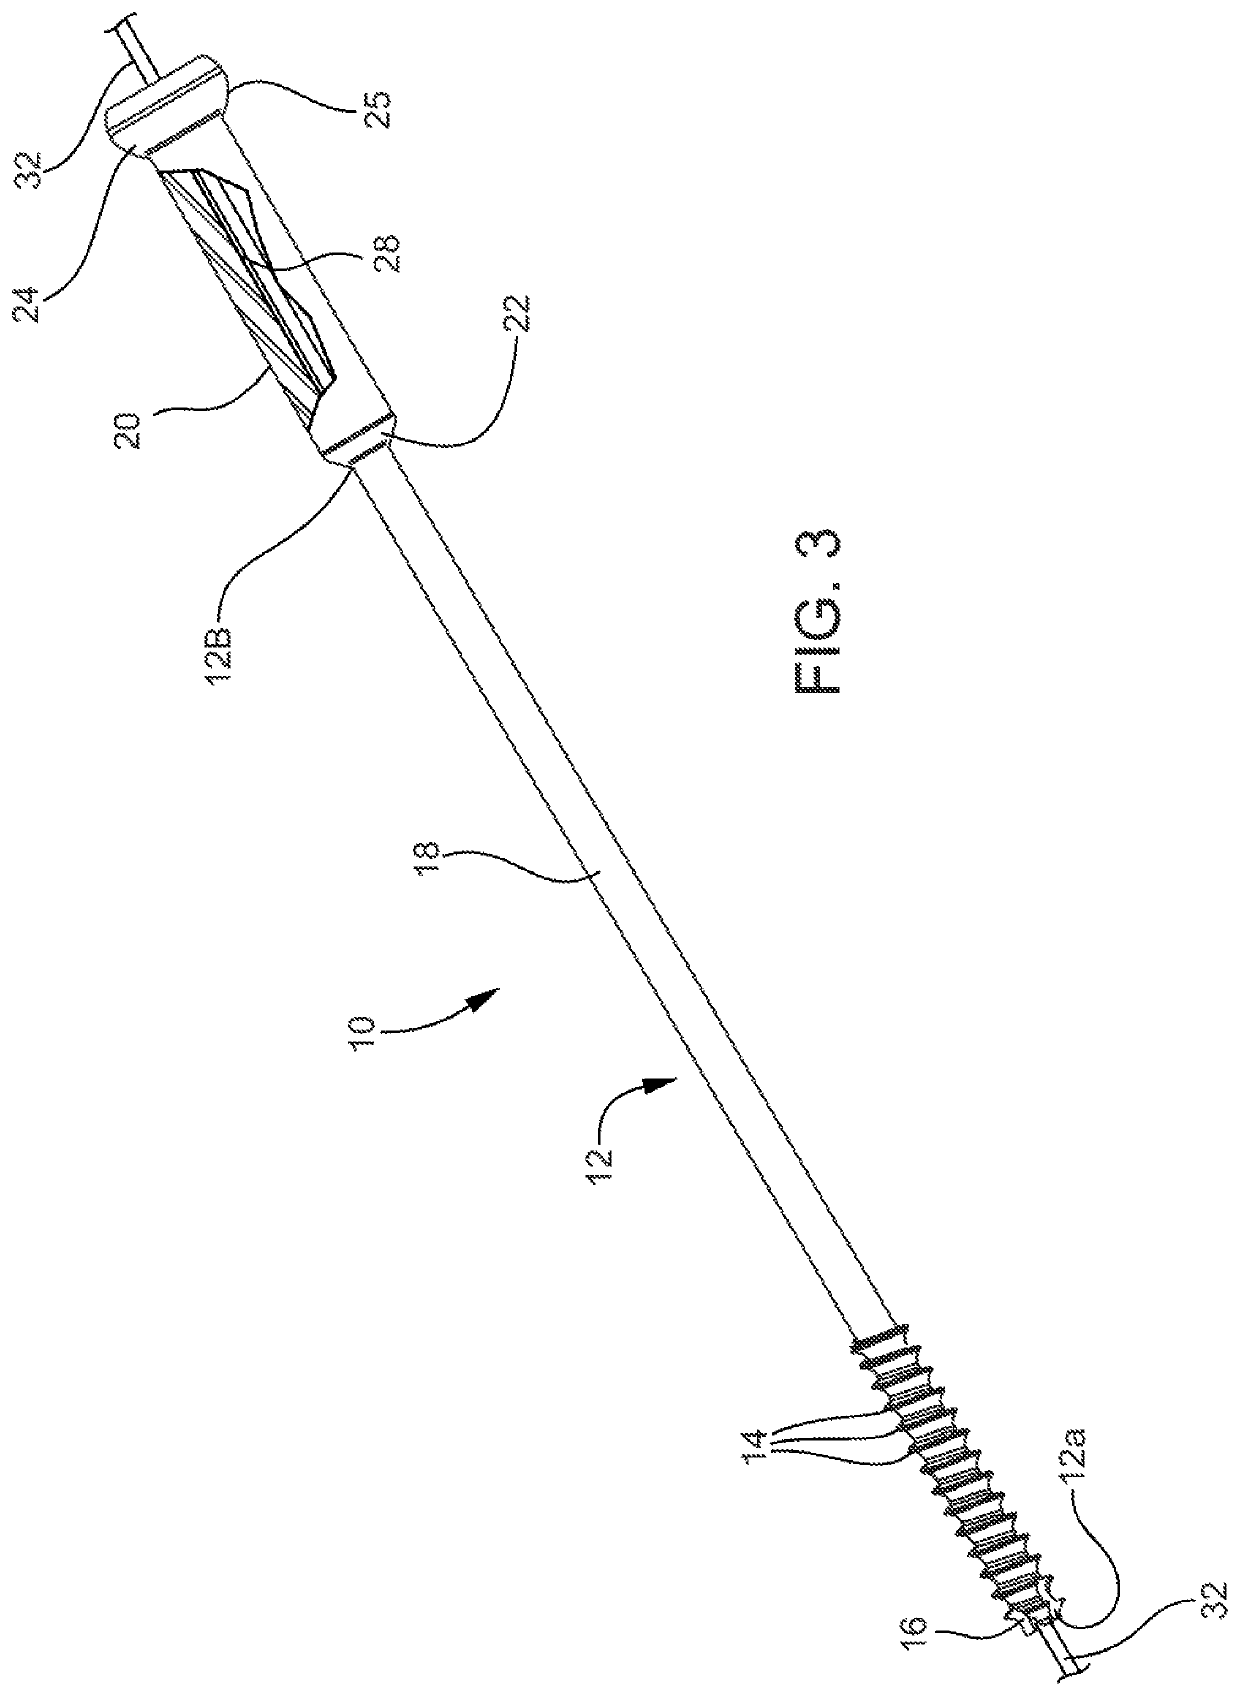 Cannulated orthopedic screw and method of reducing a fracture of the lateral malleolus